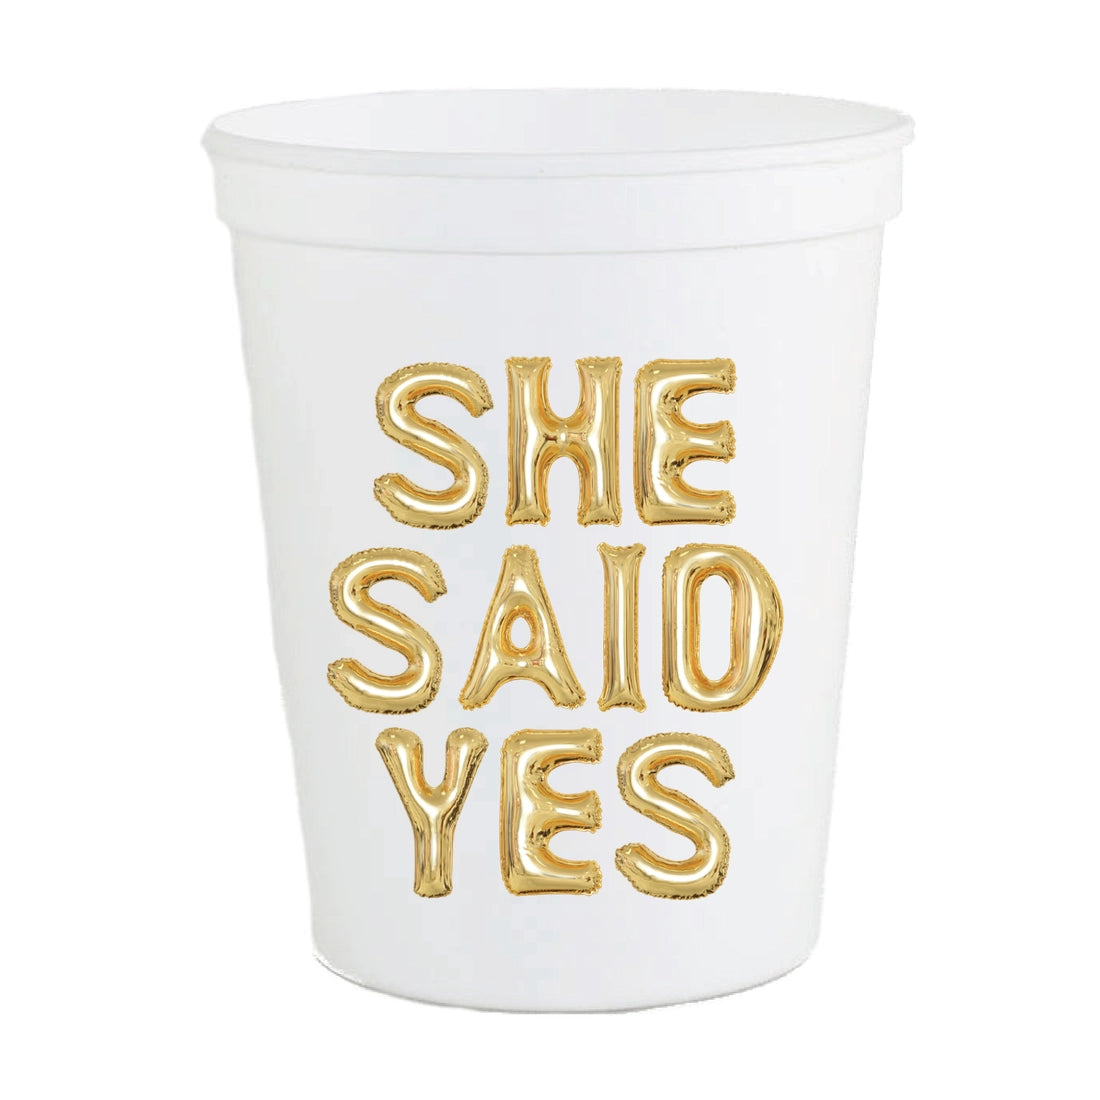 She Said Yes Reusable Cups - Set of 6 Cups